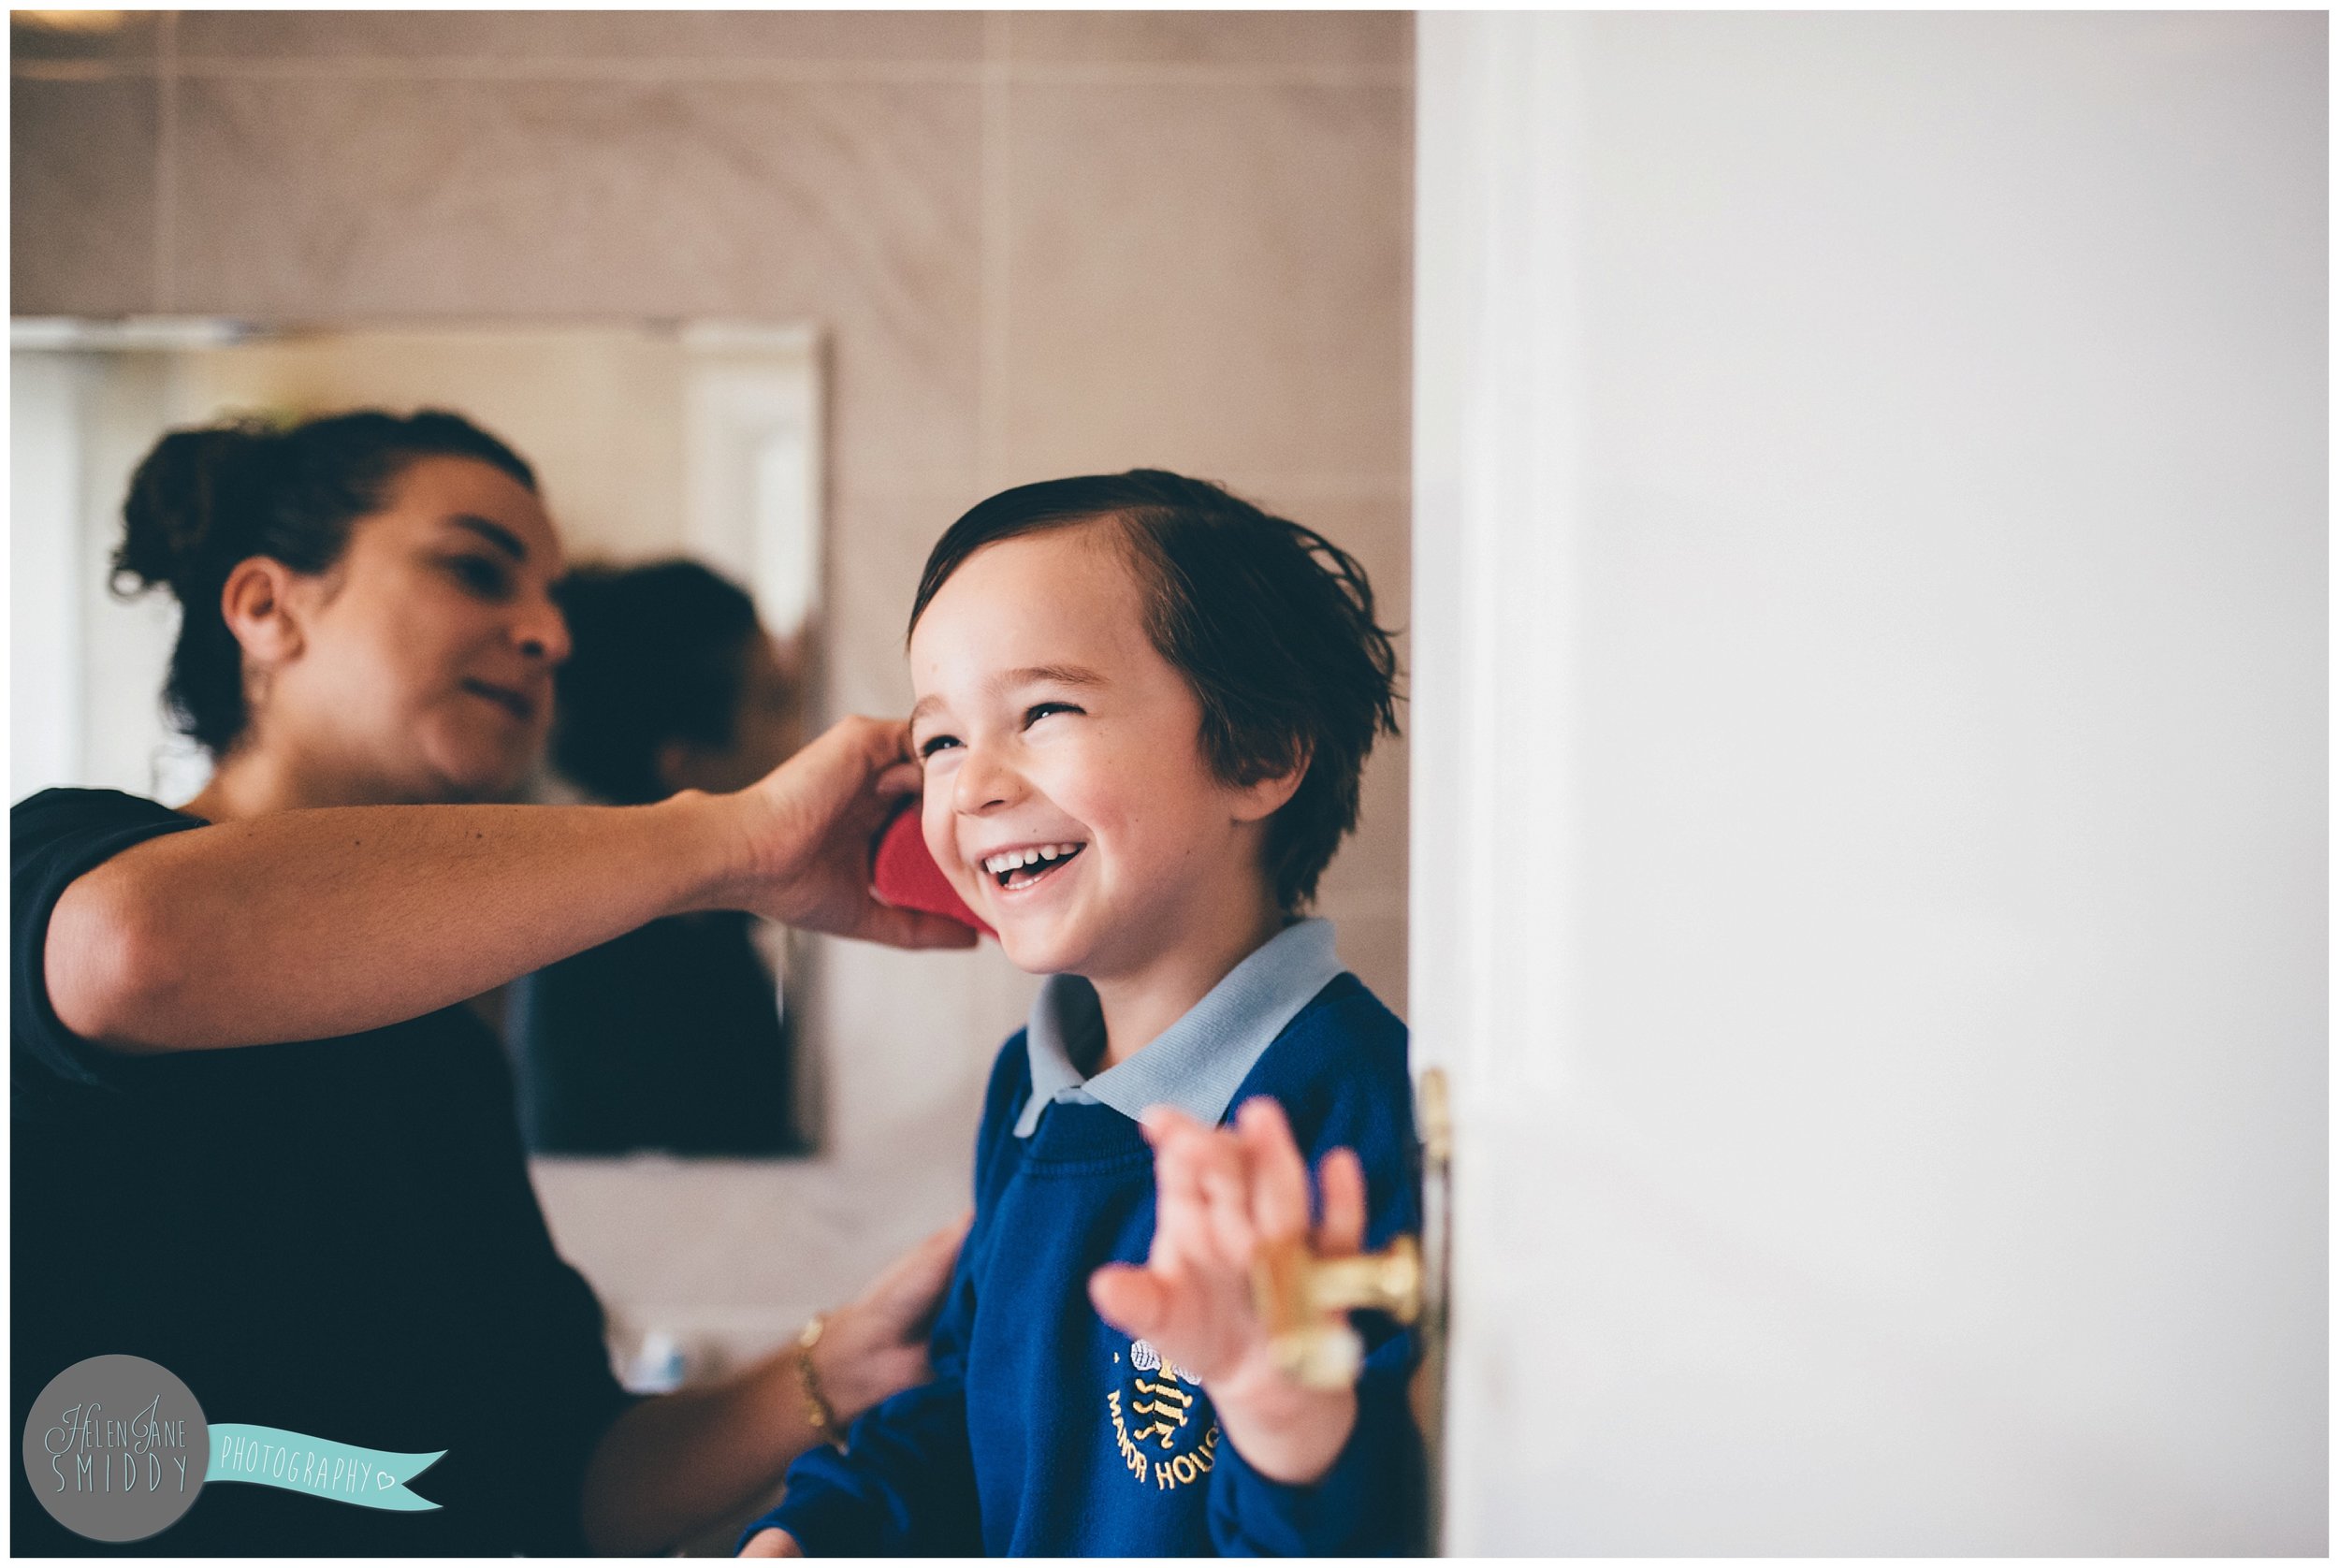 Isaac laughs so hard whilst his mummy jokes with him getting ready for school.